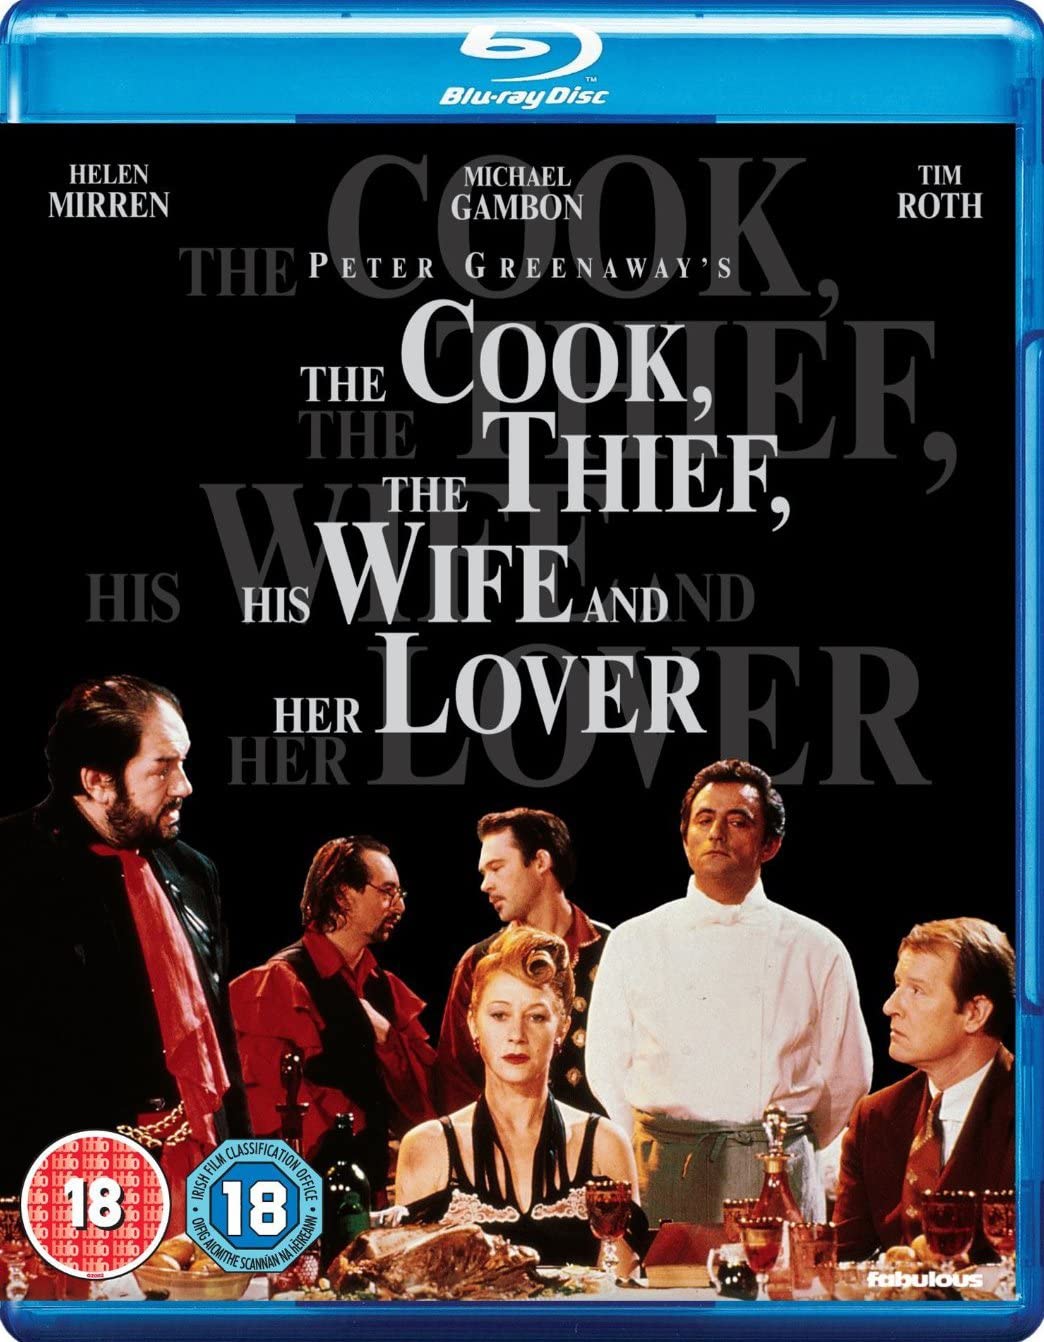 The Cook, The Thief, His Wife and Her Lover - Blu Ray Disc | Peter Greenaway